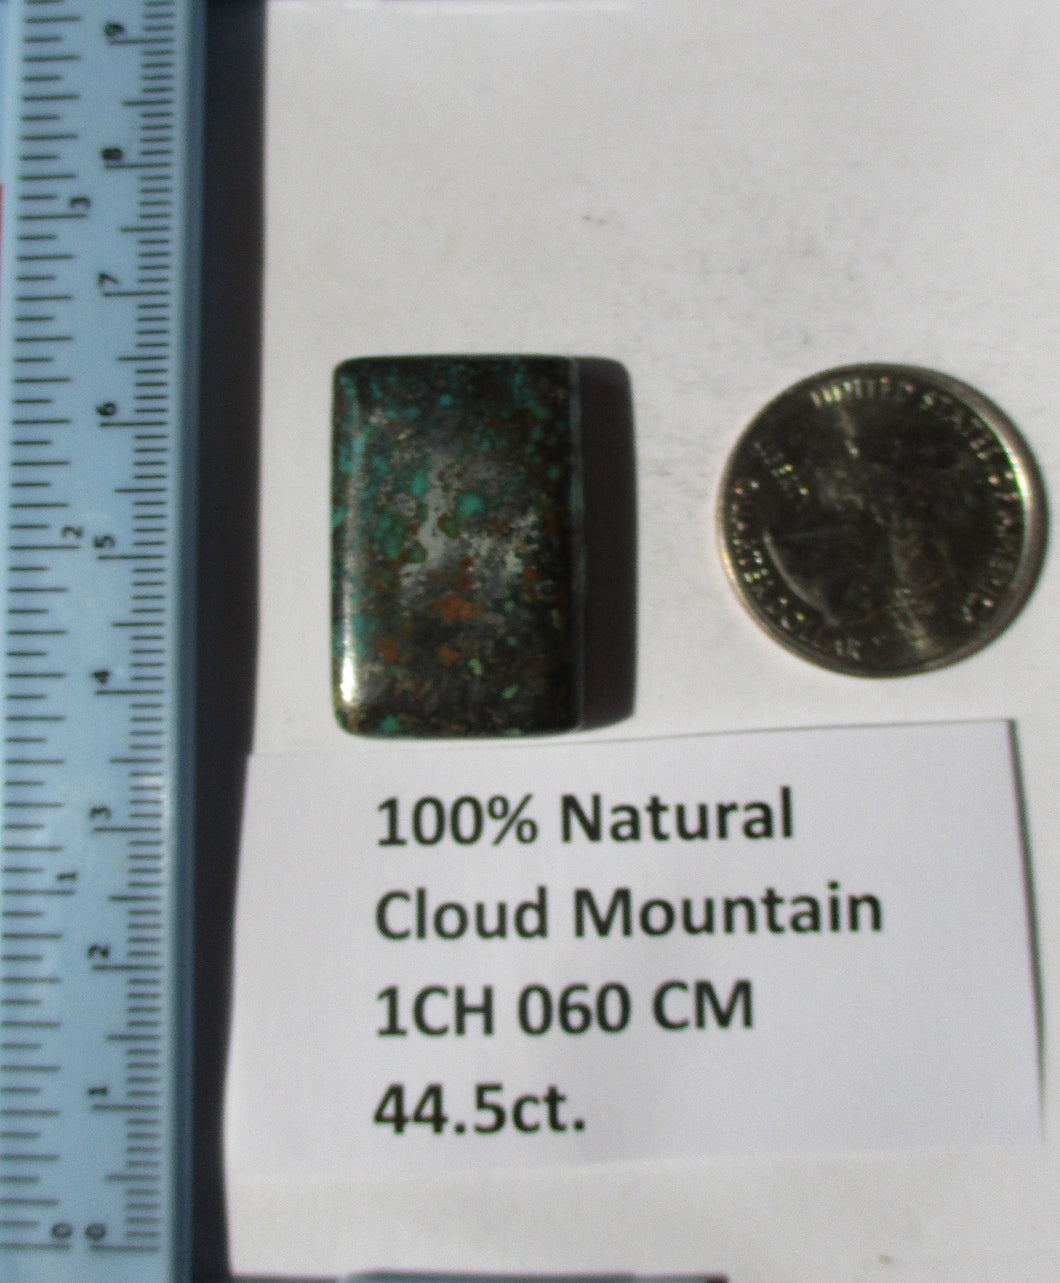 44.5 ct. (29.5x19.5x6 mm) 100% Natural  Cloud Mountain Turquoise  Cabochon, Gemstone, # 1CH 060